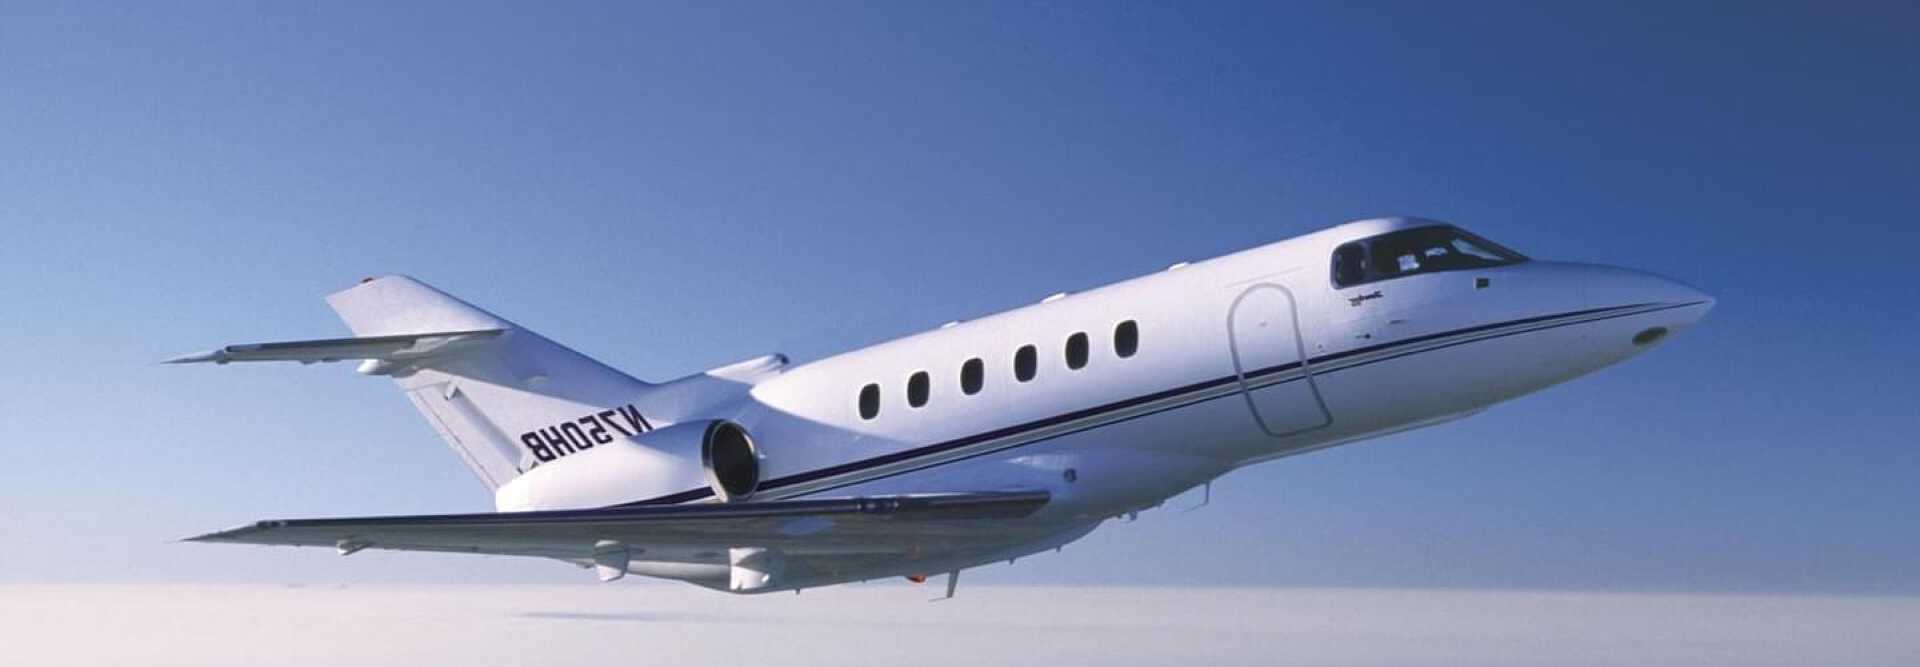 Super Light Jet Hawker Beechcraft 750 to charter for private flights with LunaJets, increased luggage space, comfortable cabin, performance